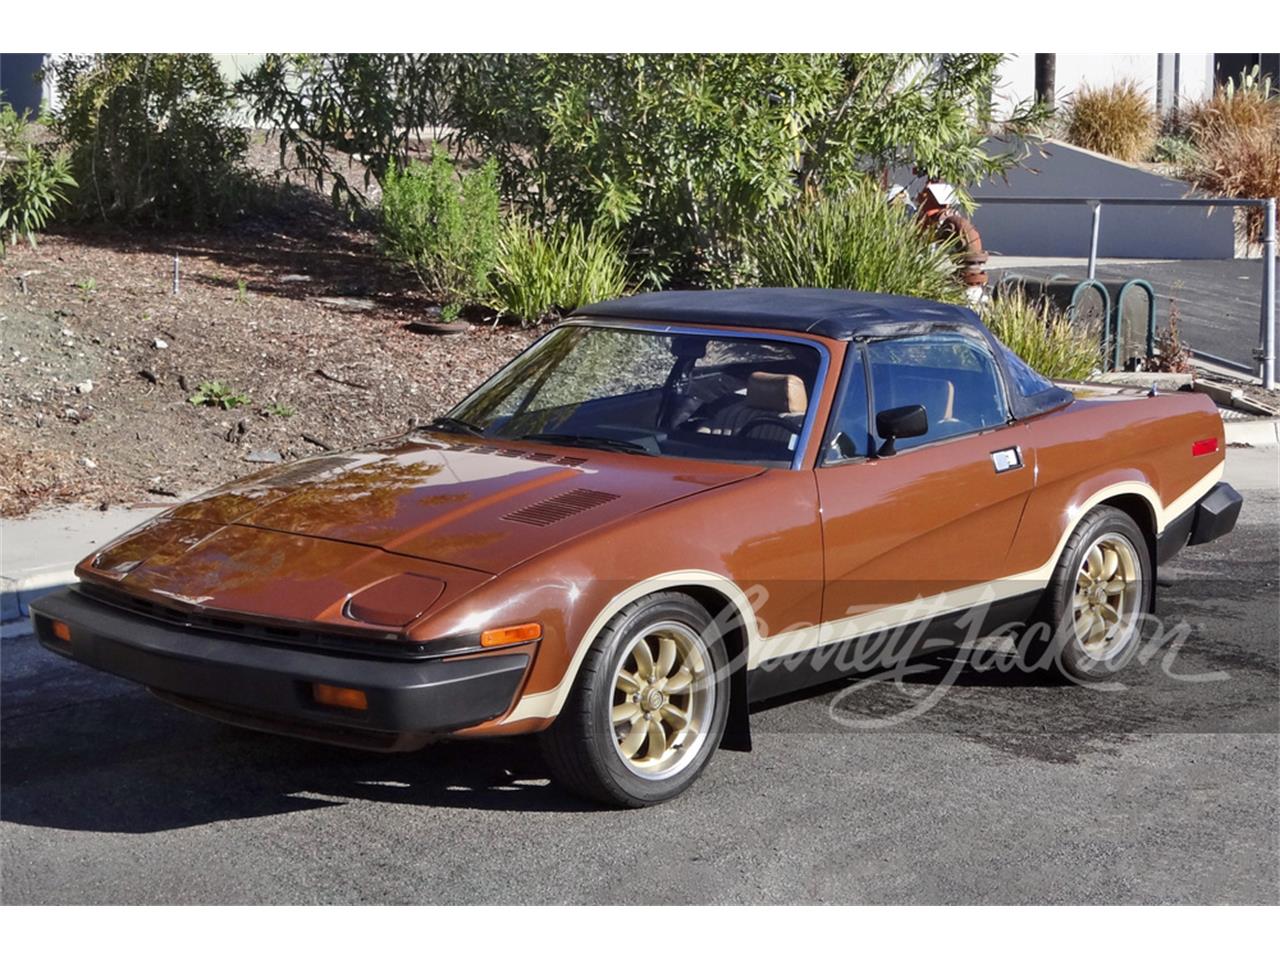 For Sale at Auction: 1979 Triumph TR7 in Scottsdale, Arizona for sale in Scottsdale, AZ